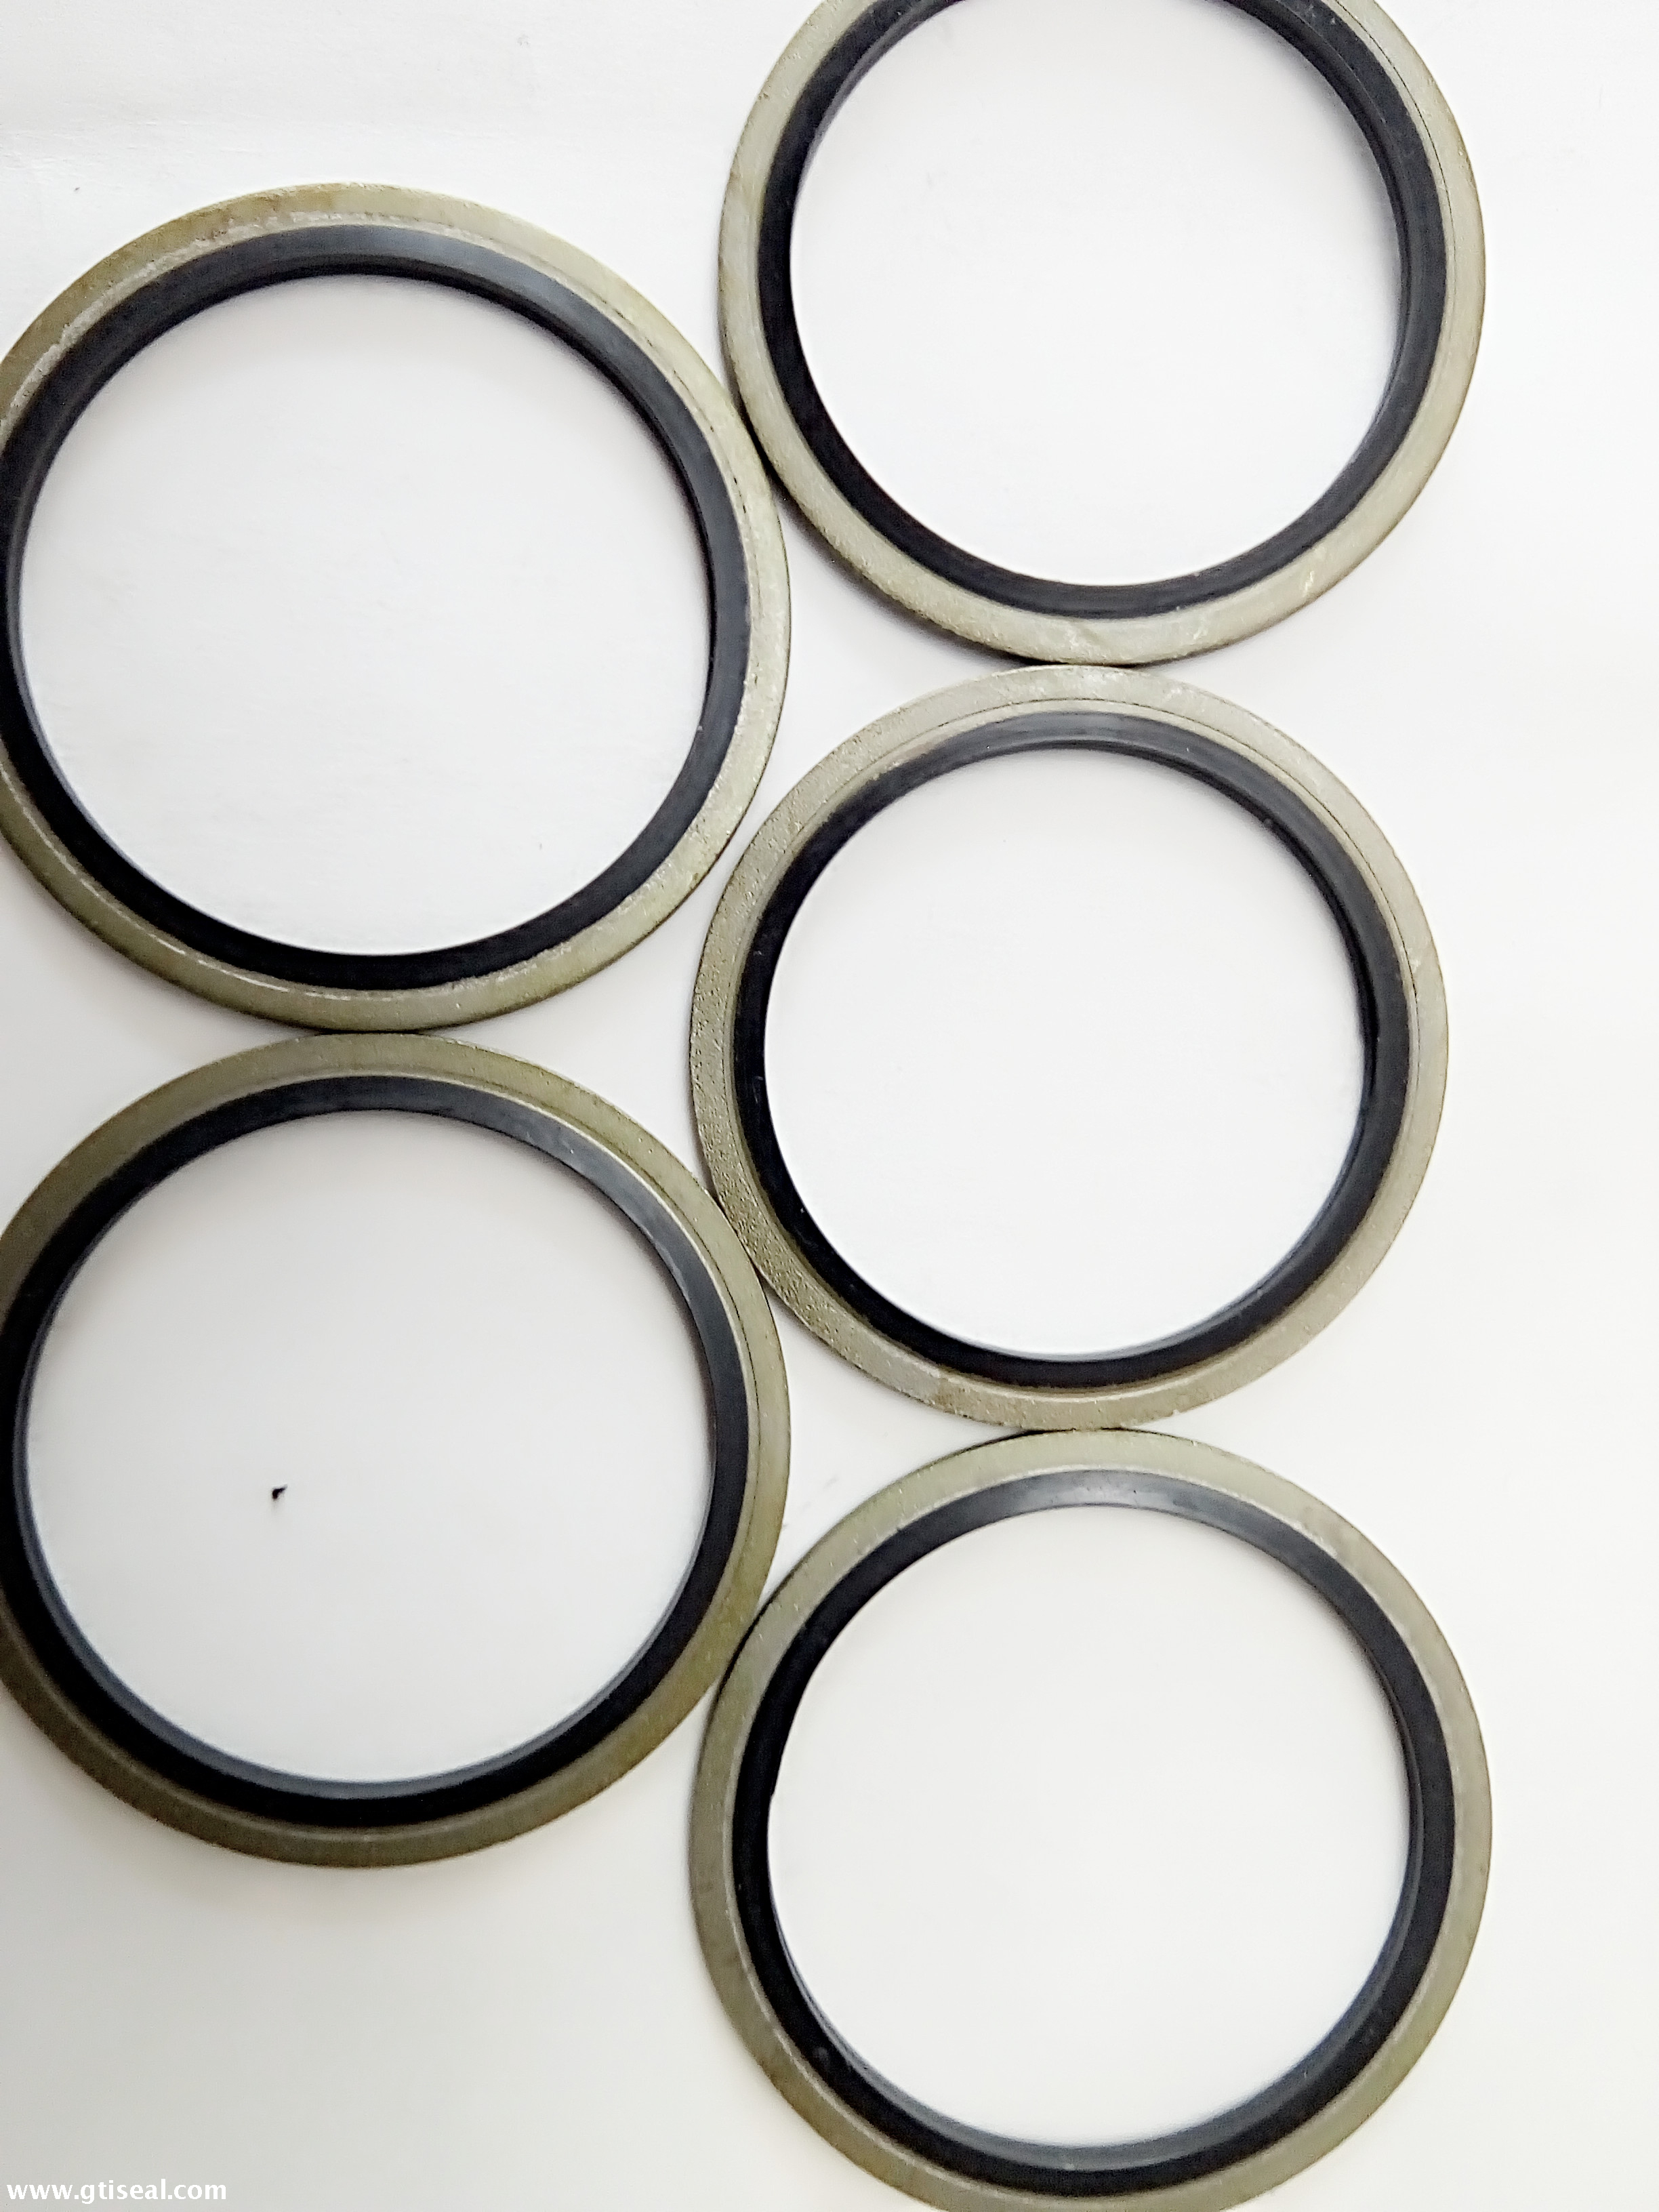 different size Single lip stainless steel oil seal for bearings pumps seal